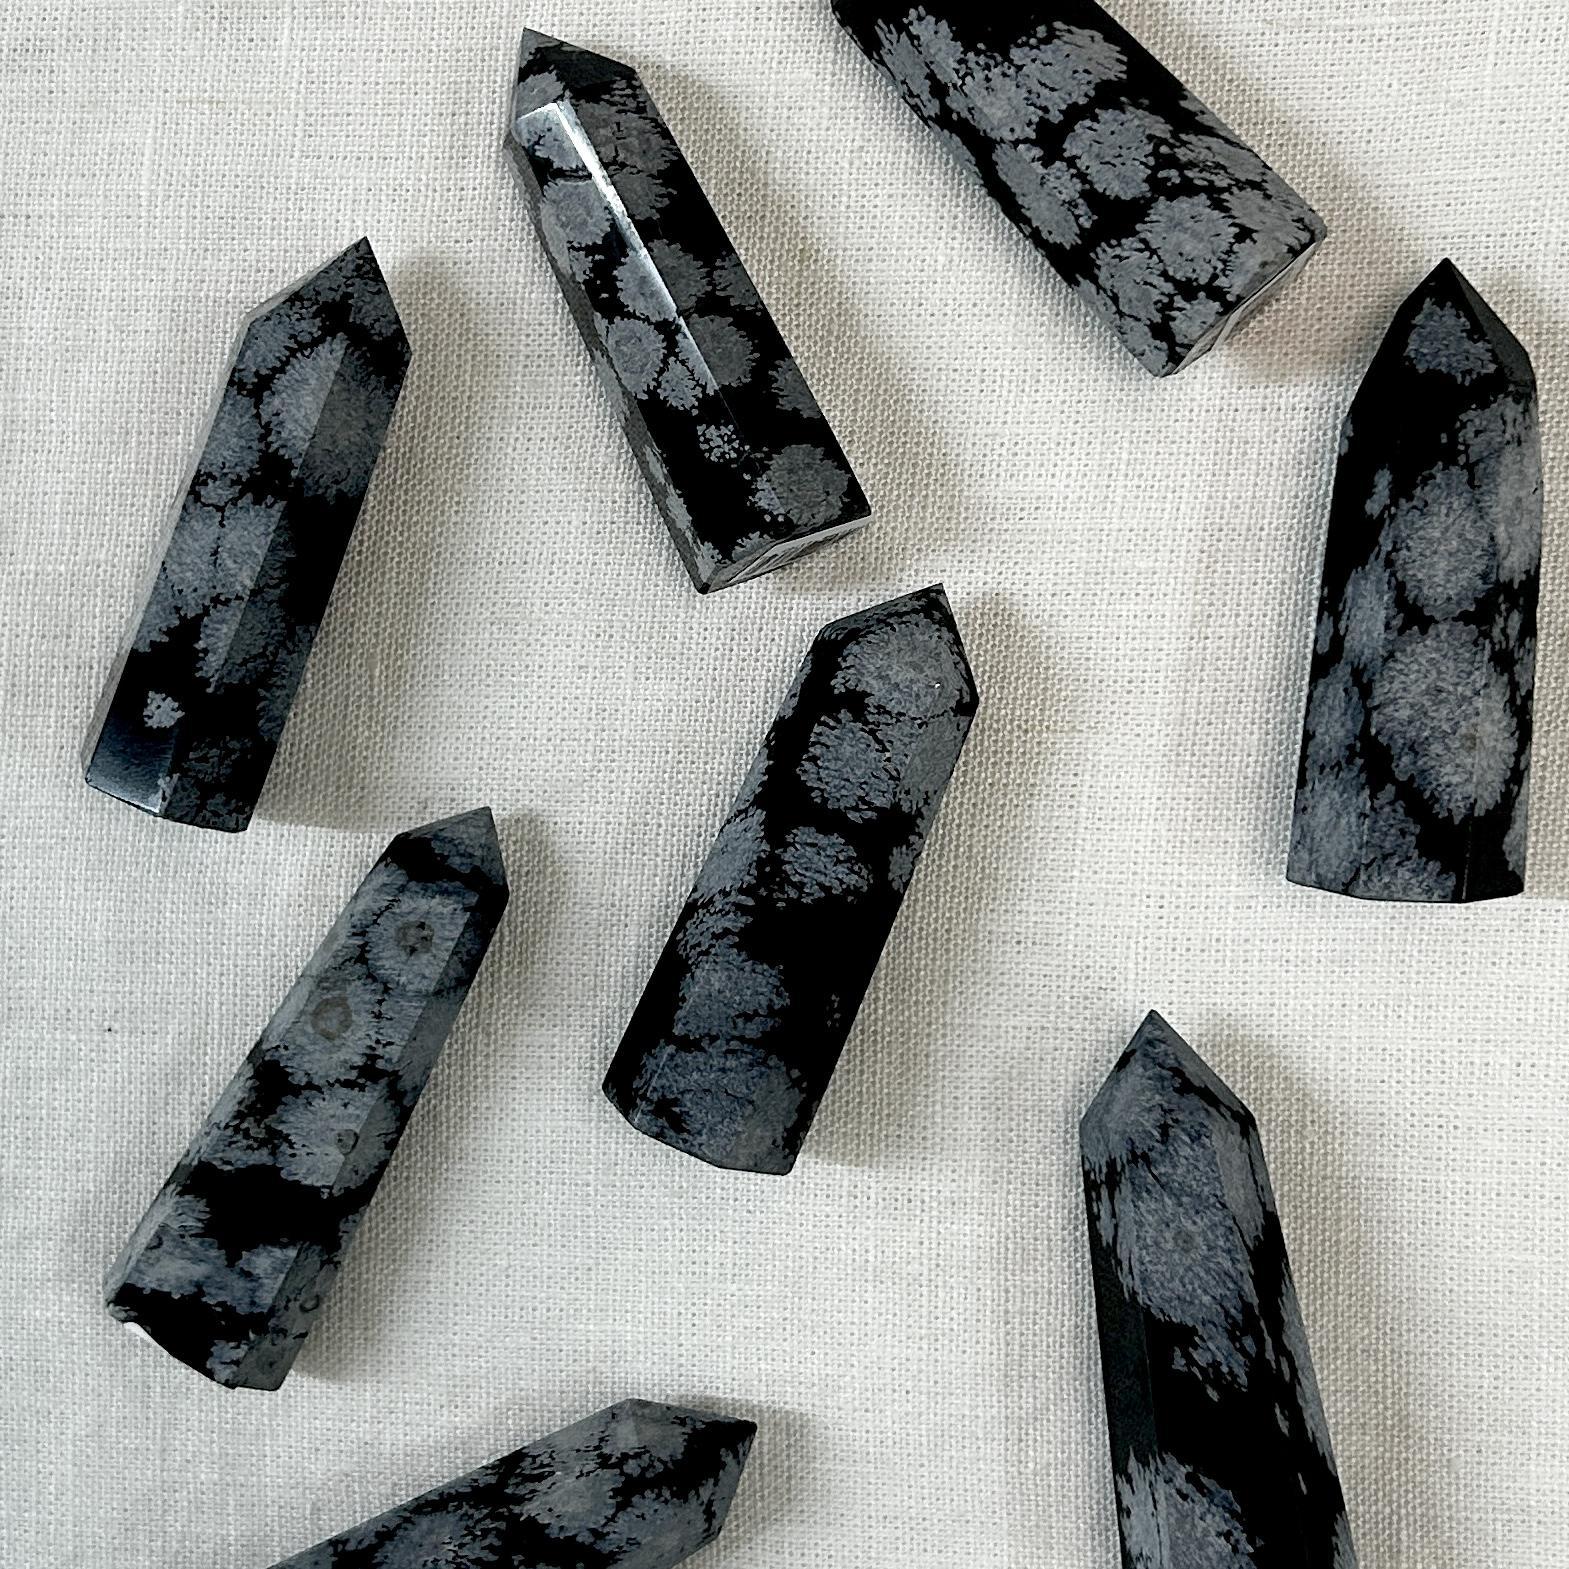 Snowflake Obsidian Crystal Tower Intuitively Chosen